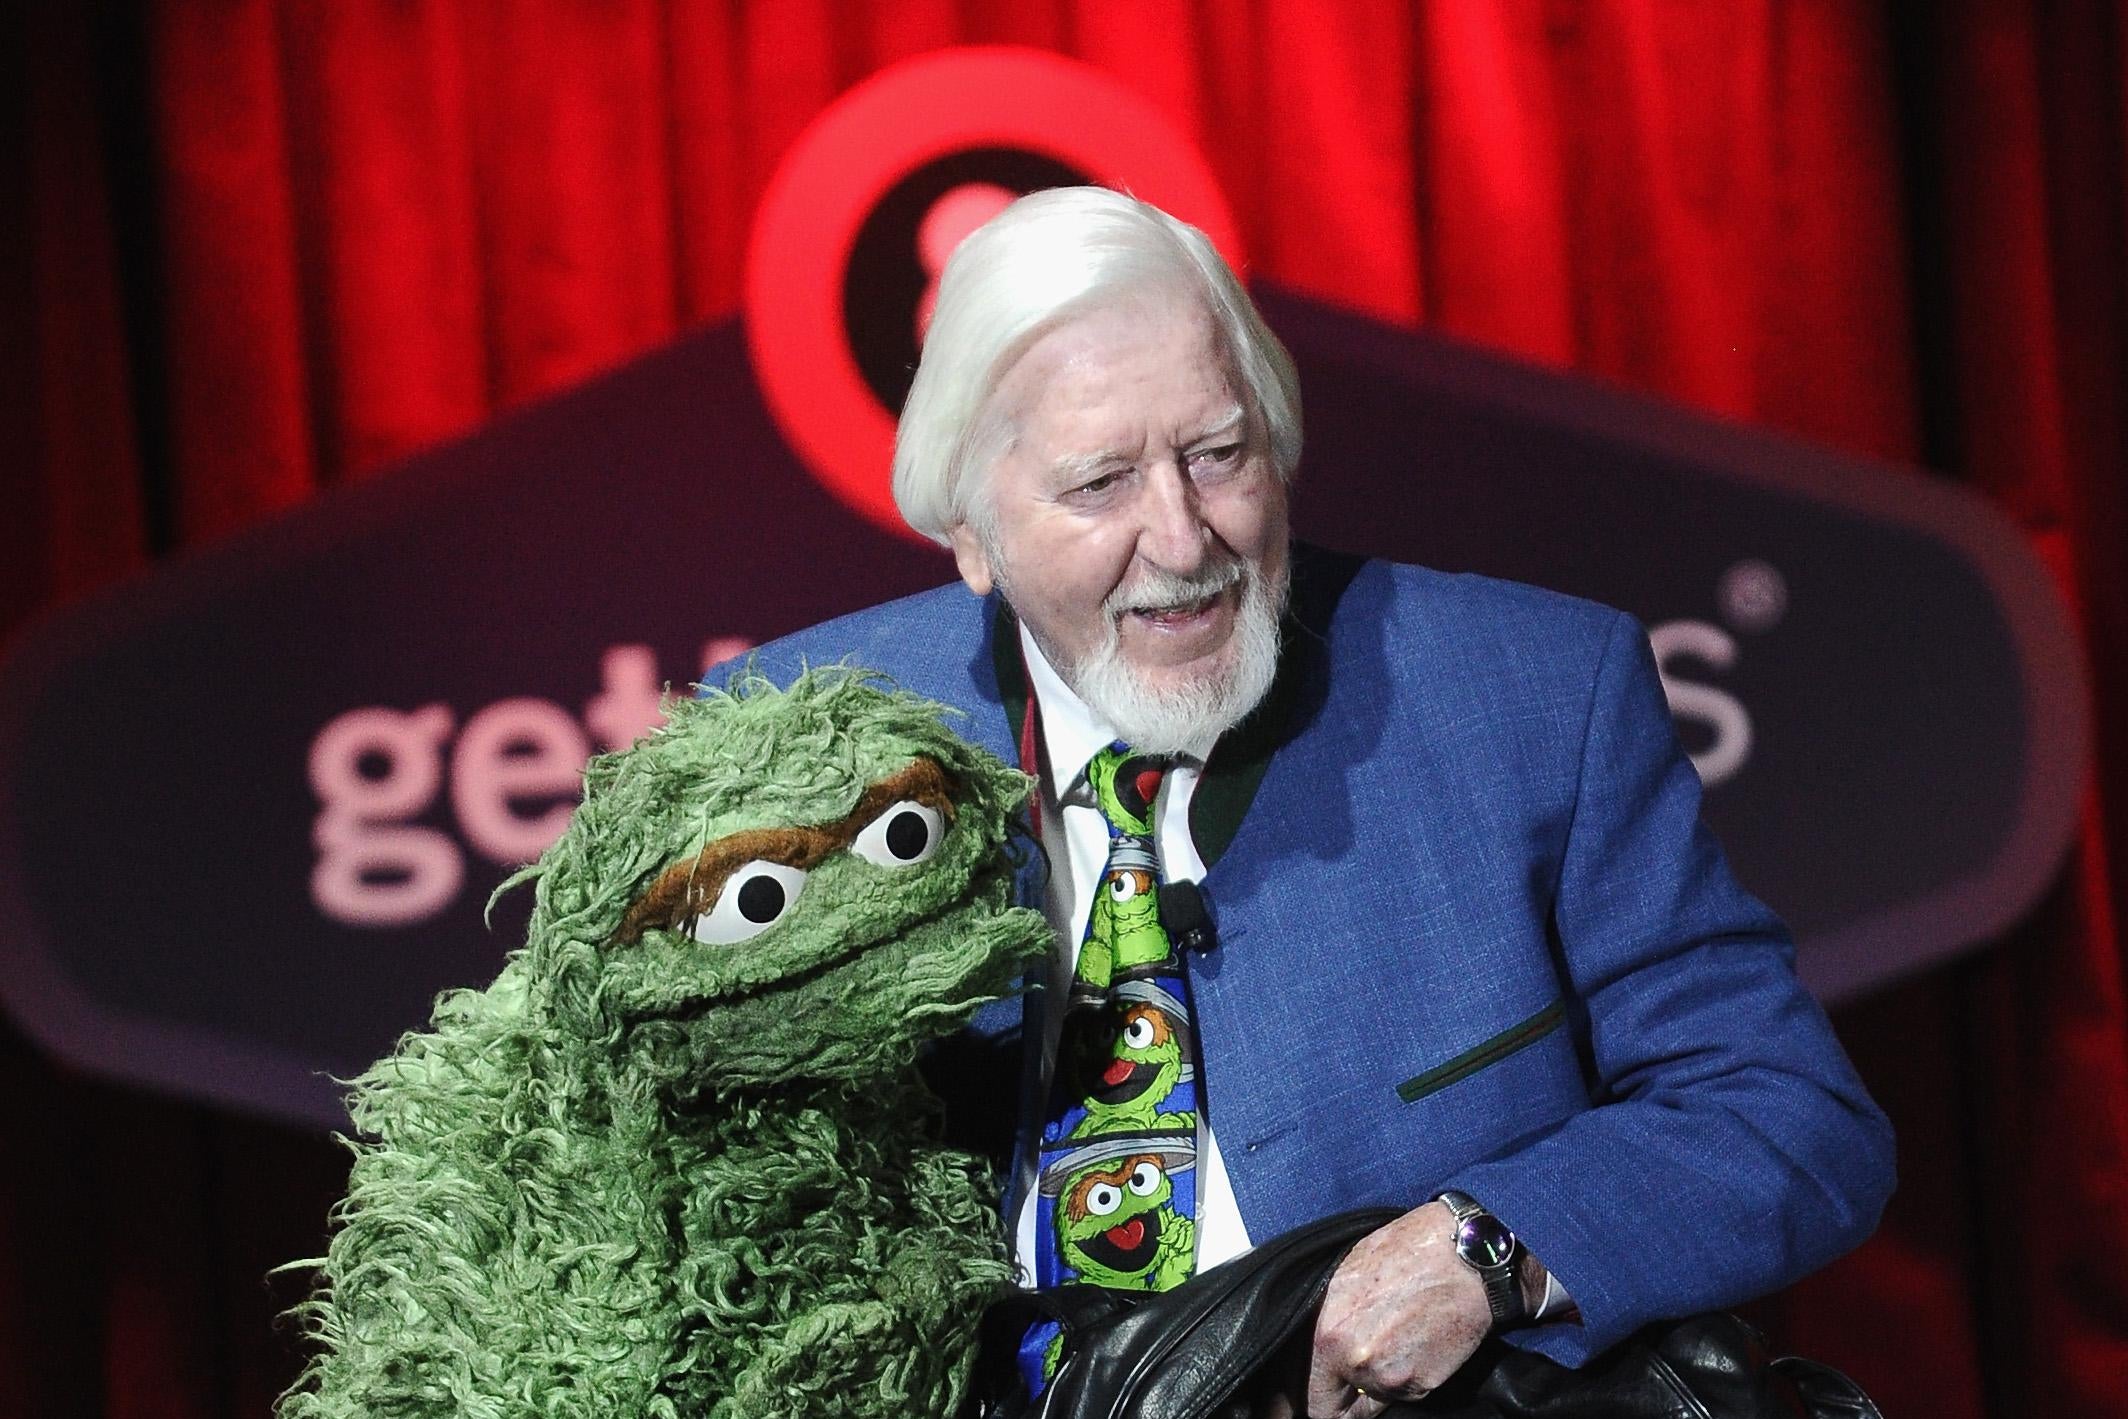 Caroll Spinney, with long white hair and a white beard, sits on a stage operating a green, fuzzy Oscar the Grouch puppet. 